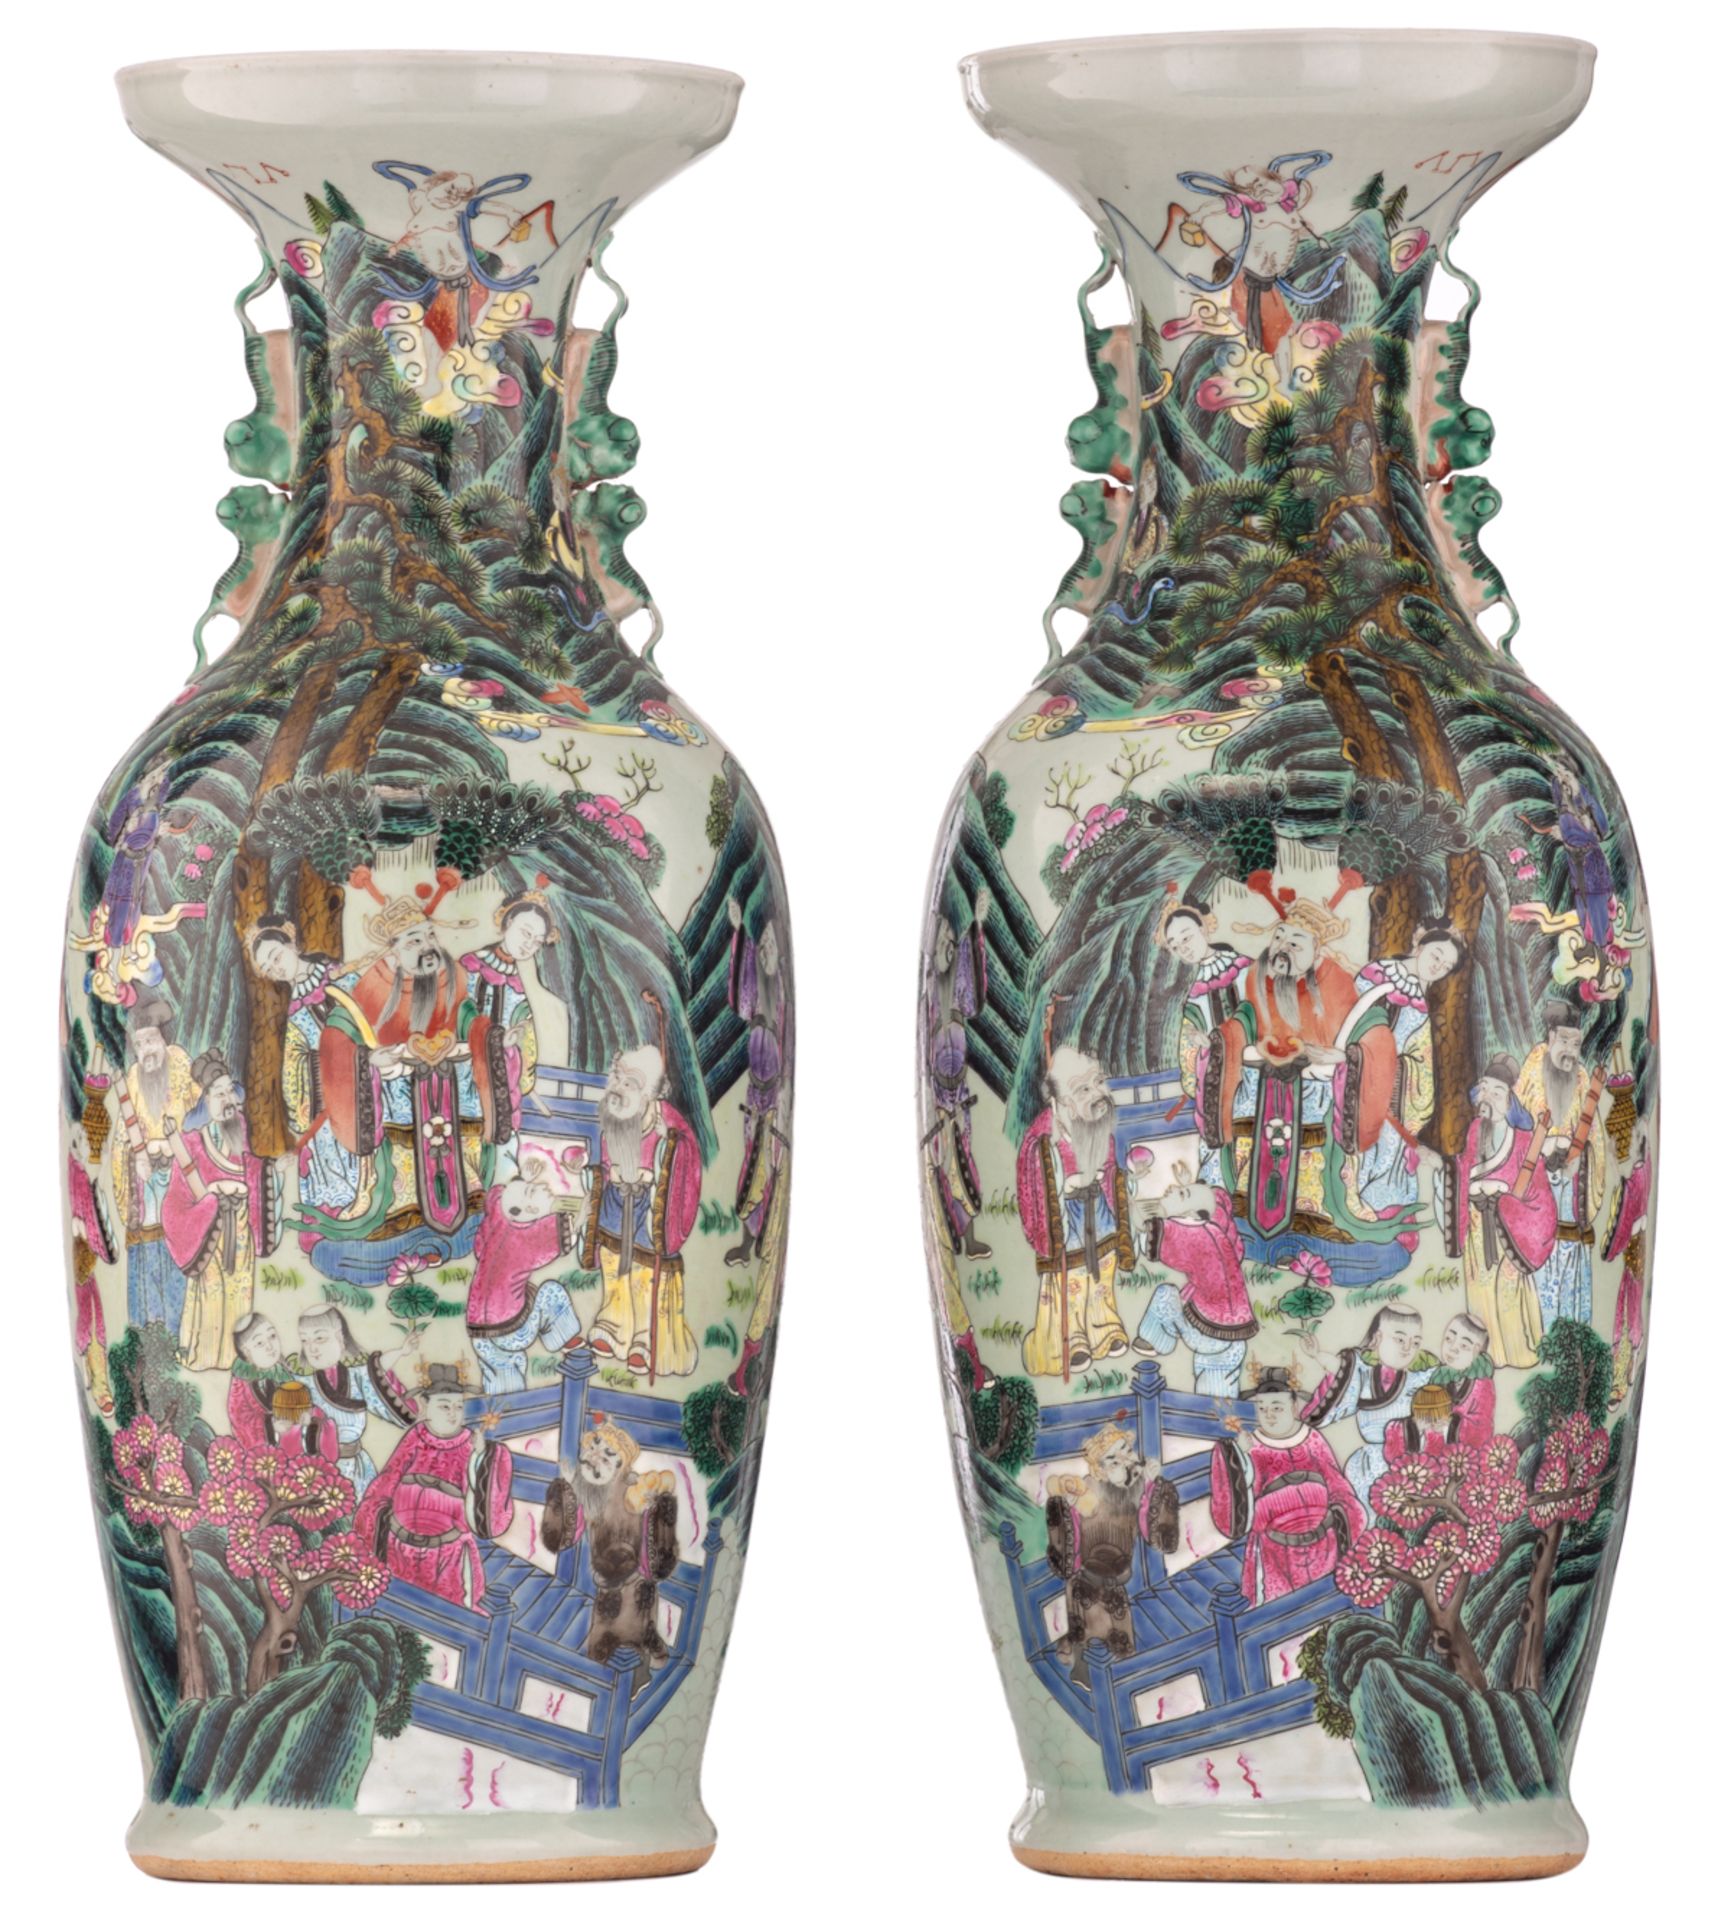 A pair of Chinese celadon ground vases, famille rose decorated with Immortals, gathering in a